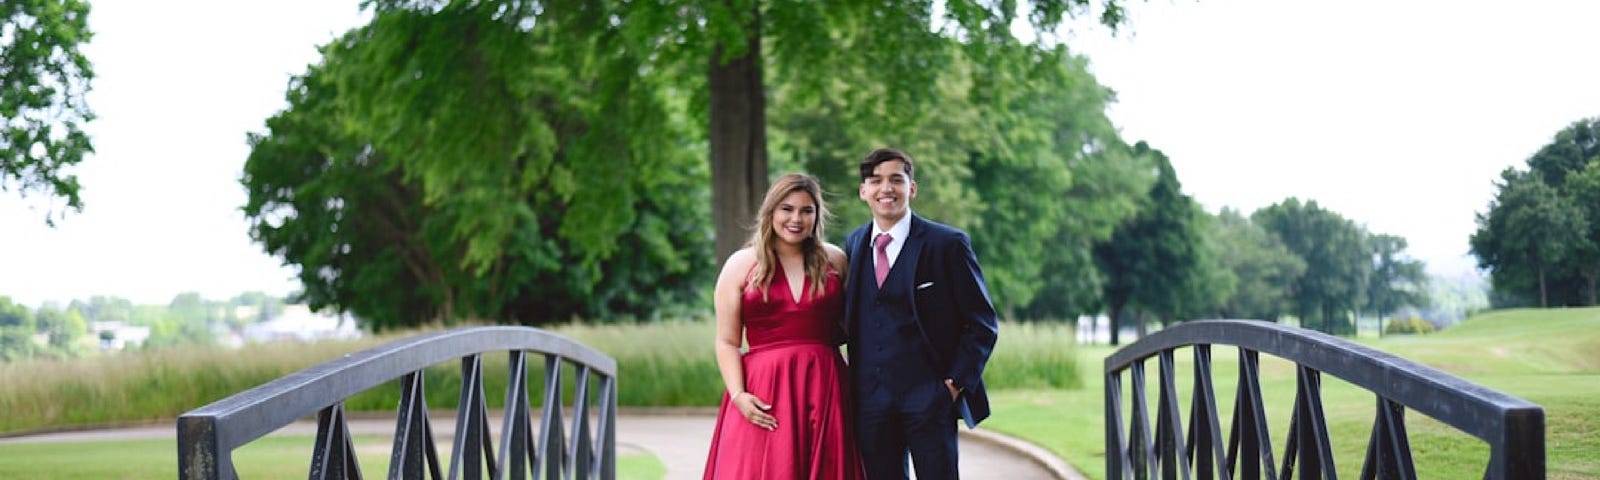 A young woman and a young man dressed for prom posing for a photo on a bridge.